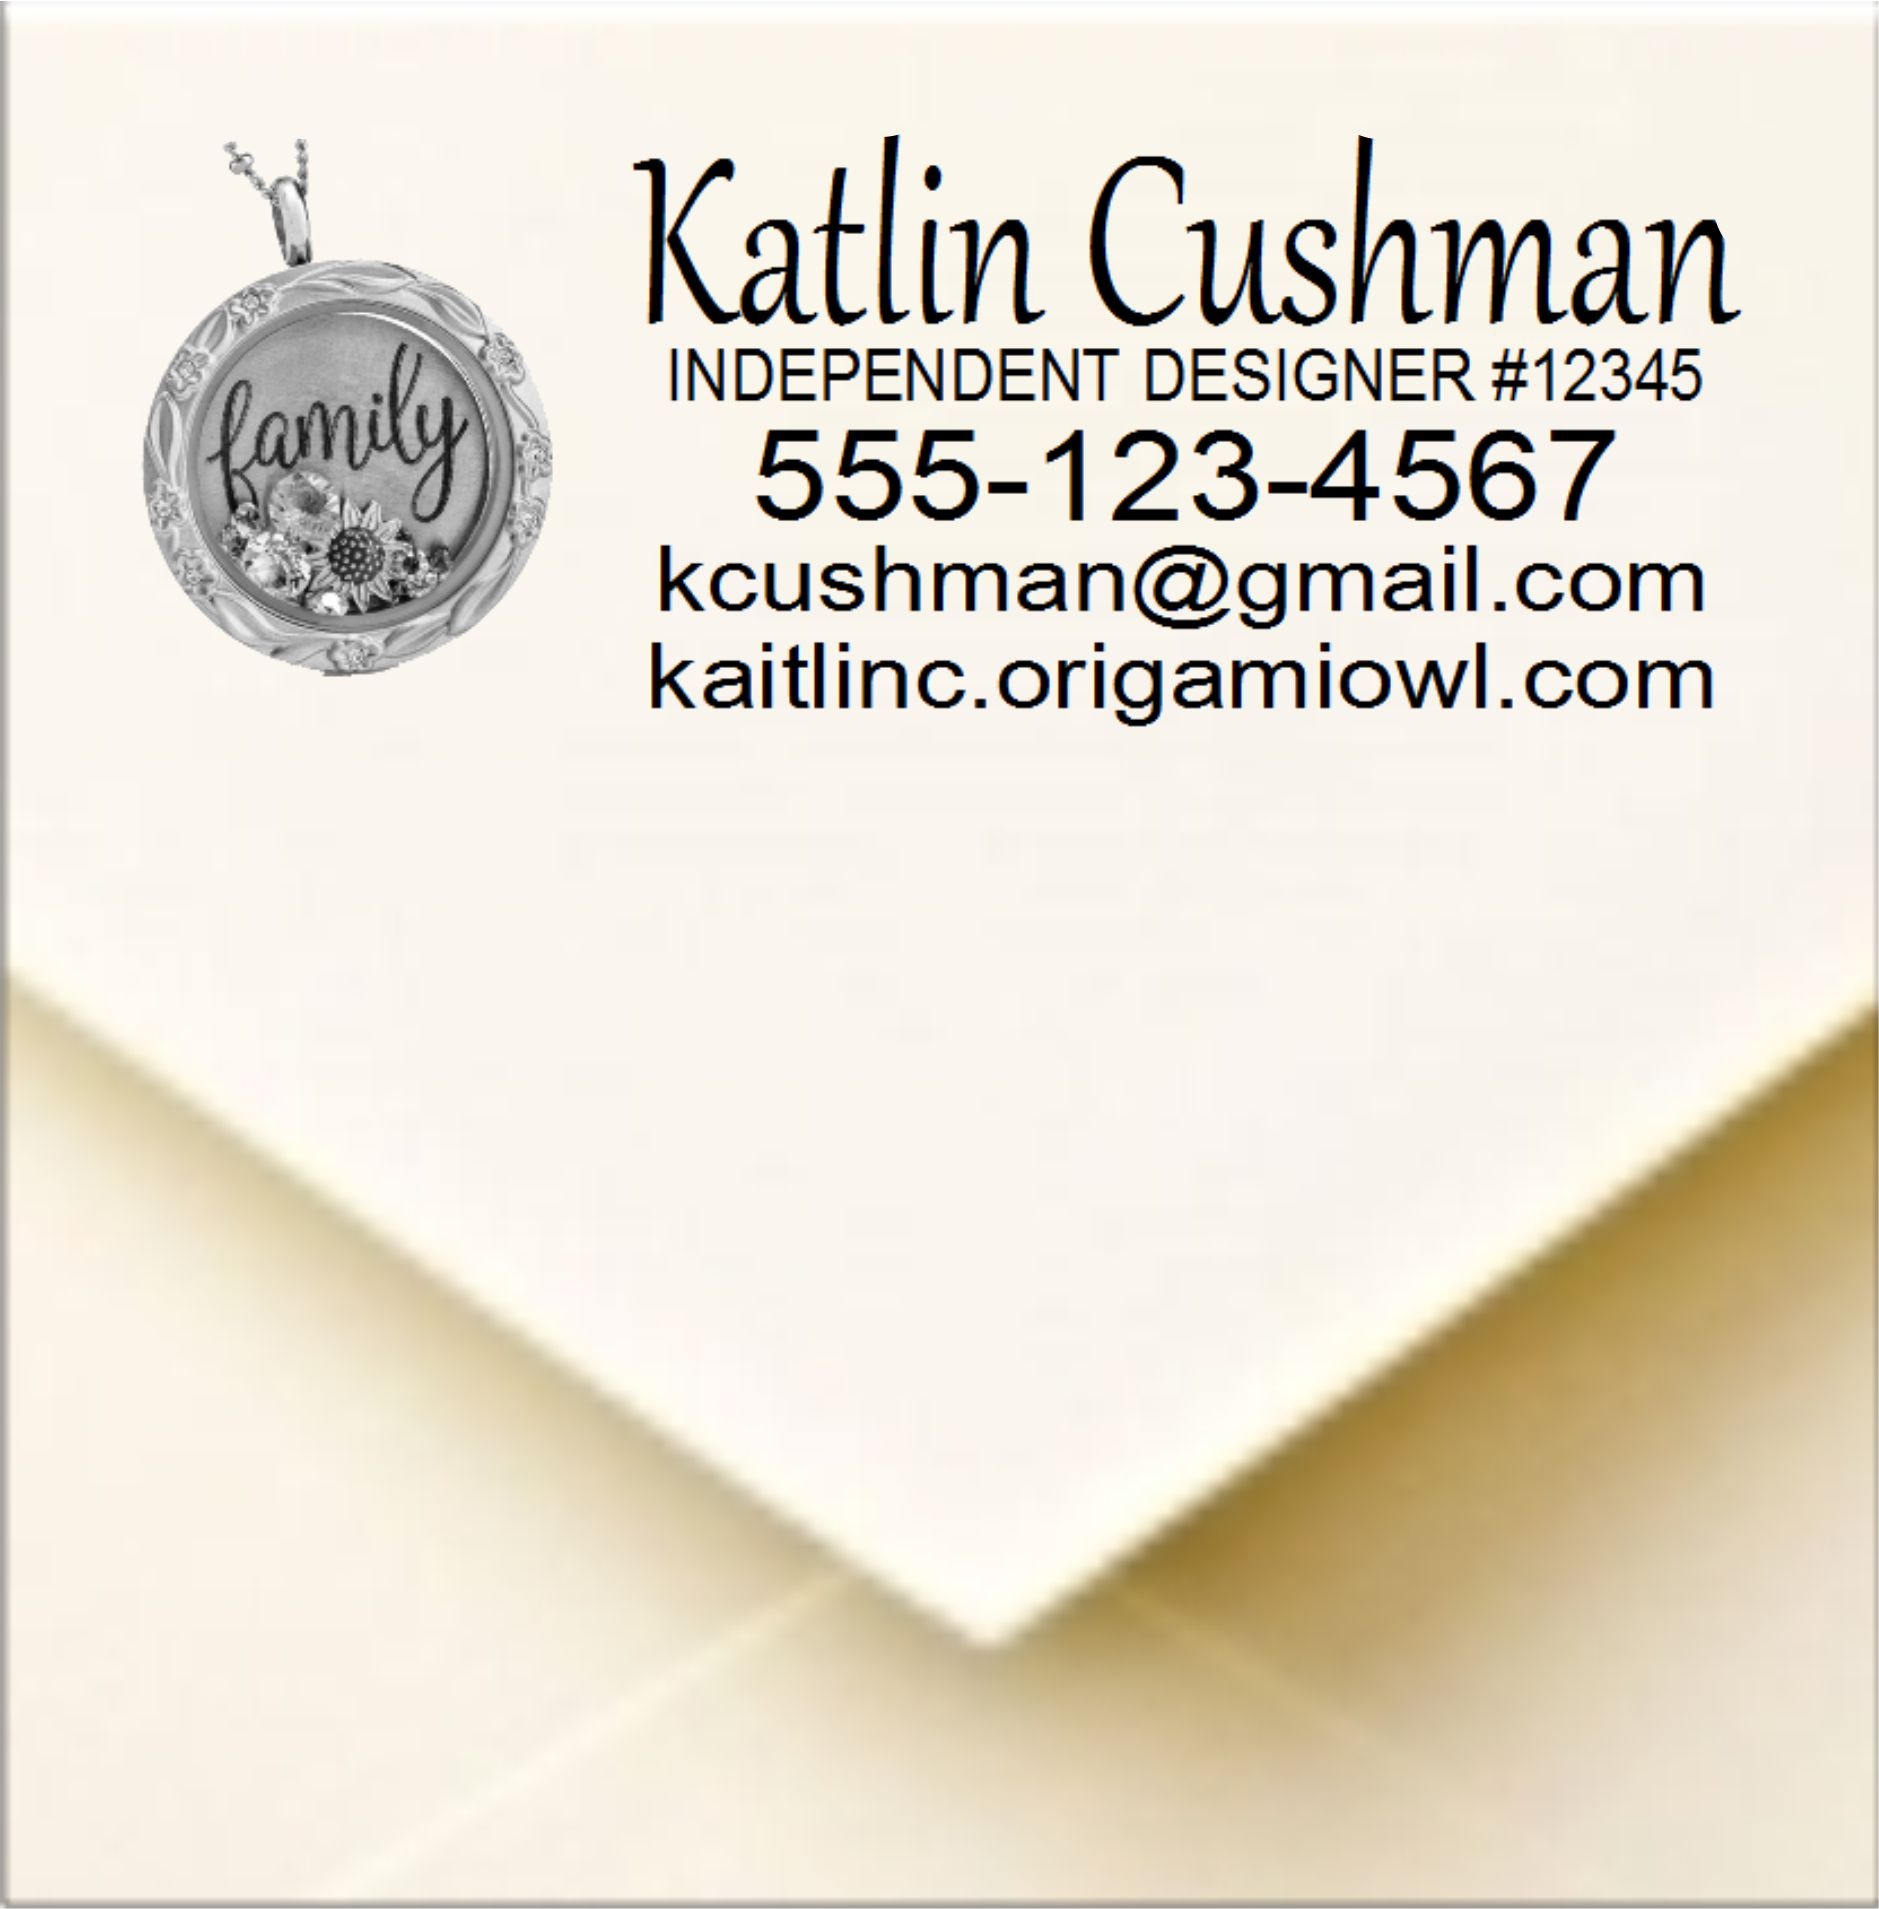 Origami Owl Designer Login Origami Owl Designer Pre Inked Stamp To Use For Your Invoices And Catalogs 2770 Stop Using Labels